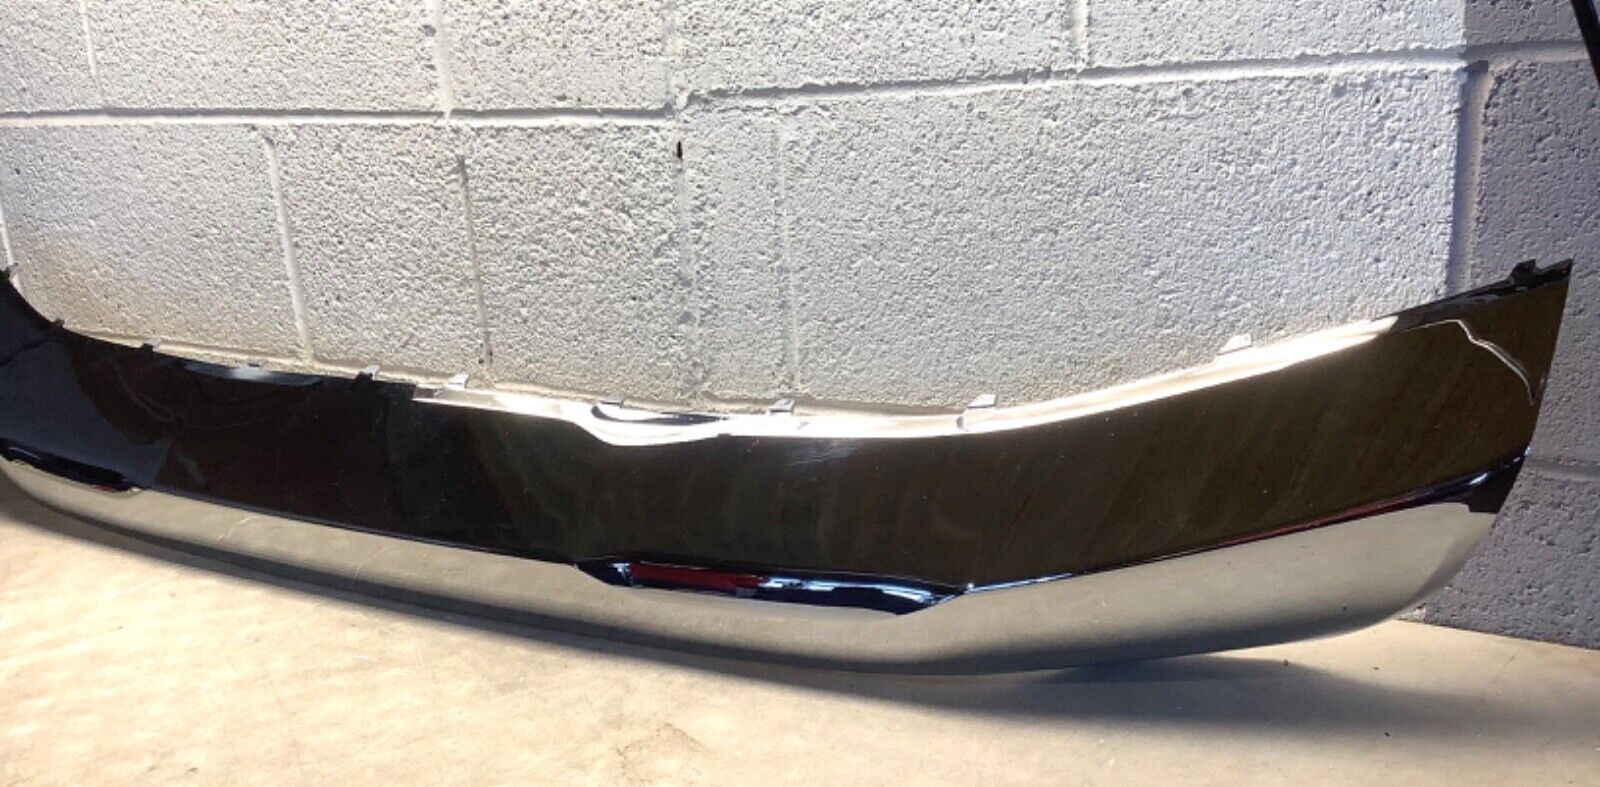 2021-2022 Palisade Front Bumper Chrome Trim Molding GREAT CONDITION🌟86577-S8100